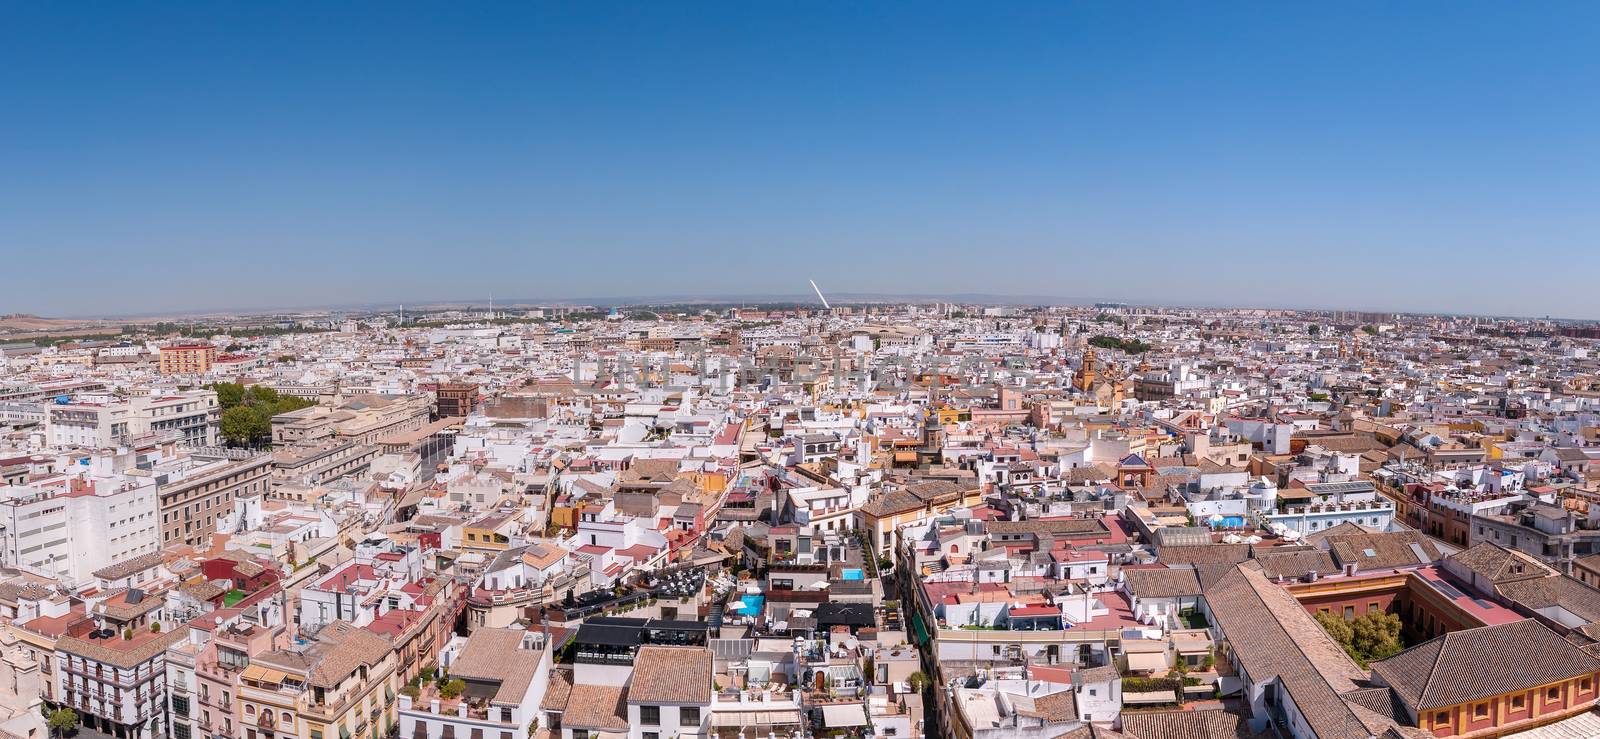 Aerial view of Seville city in Spain by mkos83